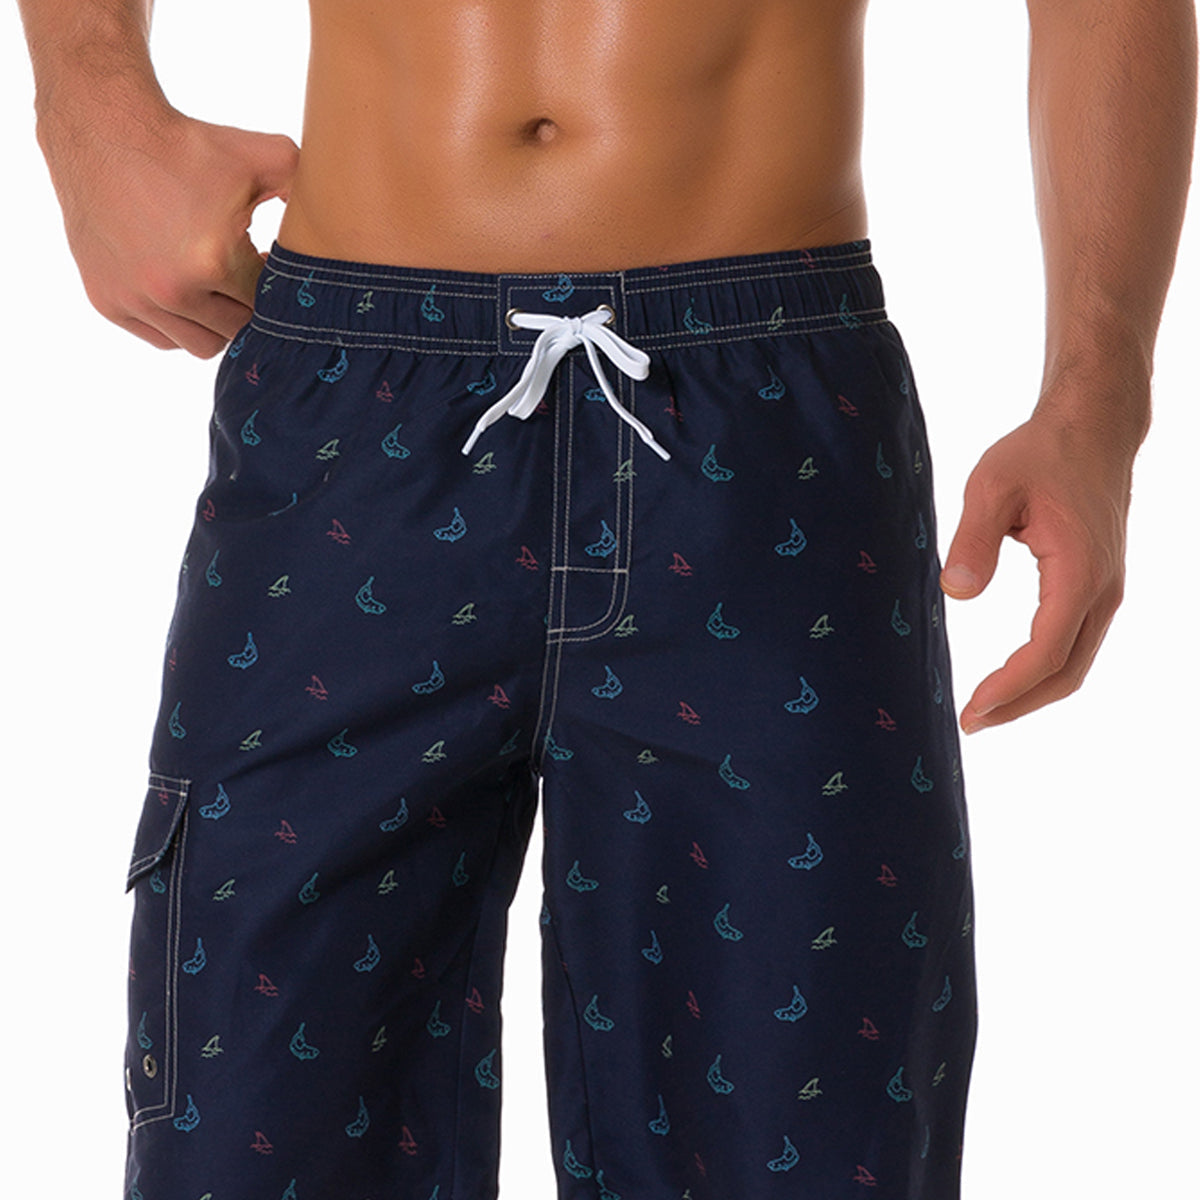 Men's Whale Print Animal Casual Beach Navy Blue Shorts Swimming Trunks